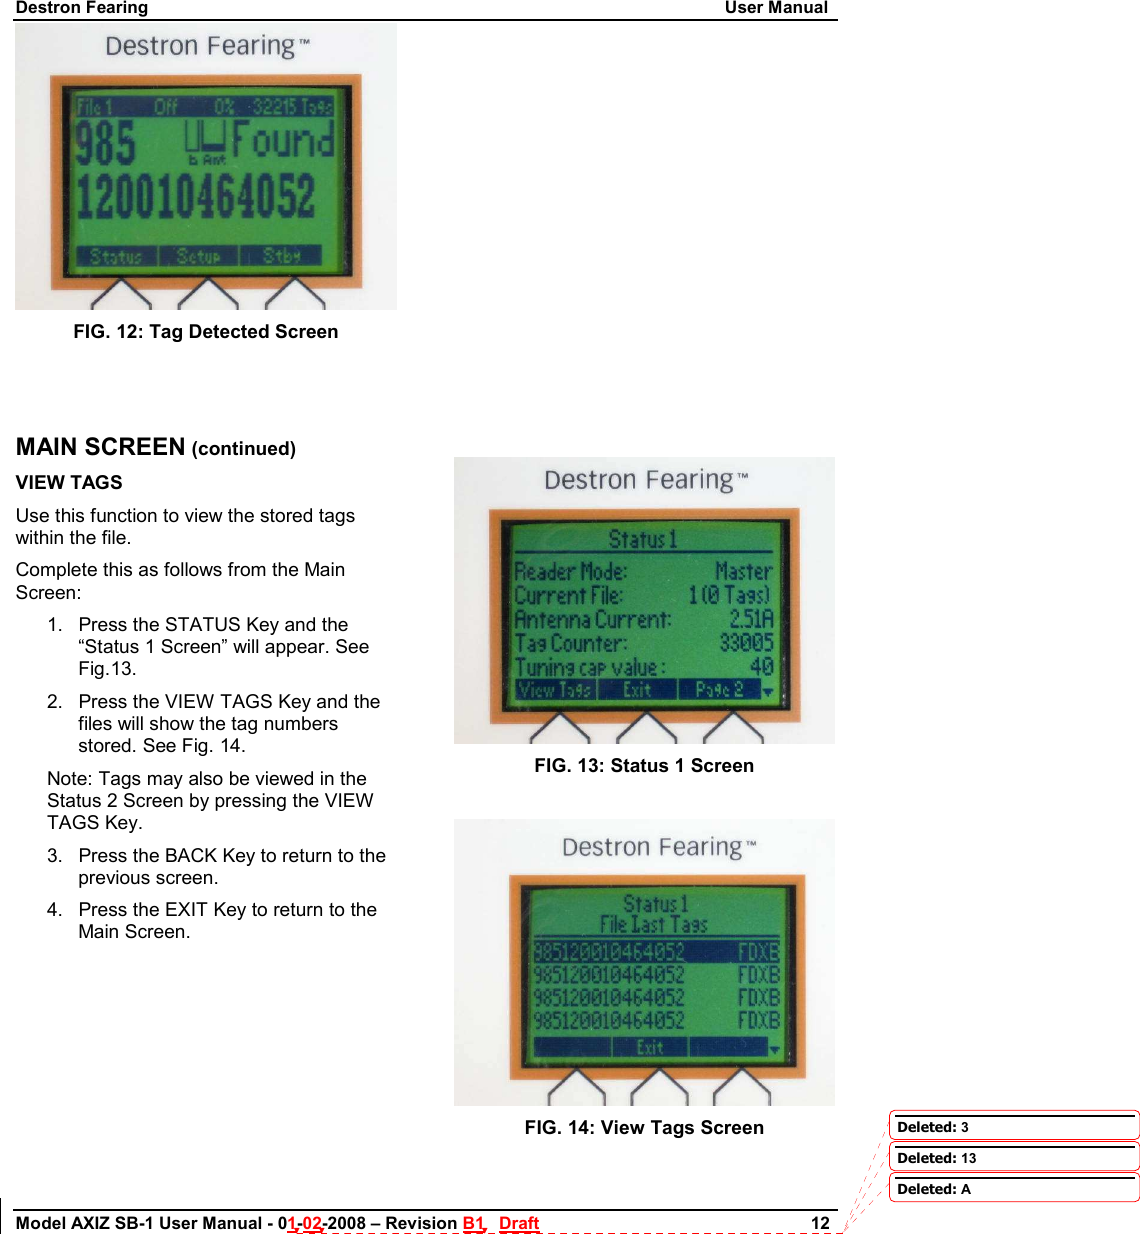 Destron Fearing                                                                                                                        User Manual Model AXIZ SB-1 User Manual - 01-02-2008 – Revision B1   Draft                        12   FIG. 12: Tag Detected Screen   MAIN SCREEN (continued) VIEW TAGS  Use this function to view the stored tags within the file. Complete this as follows from the Main Screen: 1.  Press the STATUS Key and the “Status 1 Screen” will appear. See Fig.13. 2.  Press the VIEW TAGS Key and the files will show the tag numbers stored. See Fig. 14. Note: Tags may also be viewed in the Status 2 Screen by pressing the VIEW TAGS Key. 3.  Press the BACK Key to return to the            previous screen. 4.  Press the EXIT Key to return to the Main Screen.                      FIG. 13: Status 1 Screen   FIG. 14: View Tags Screen  Deleted: 3Deleted: 13Deleted: A